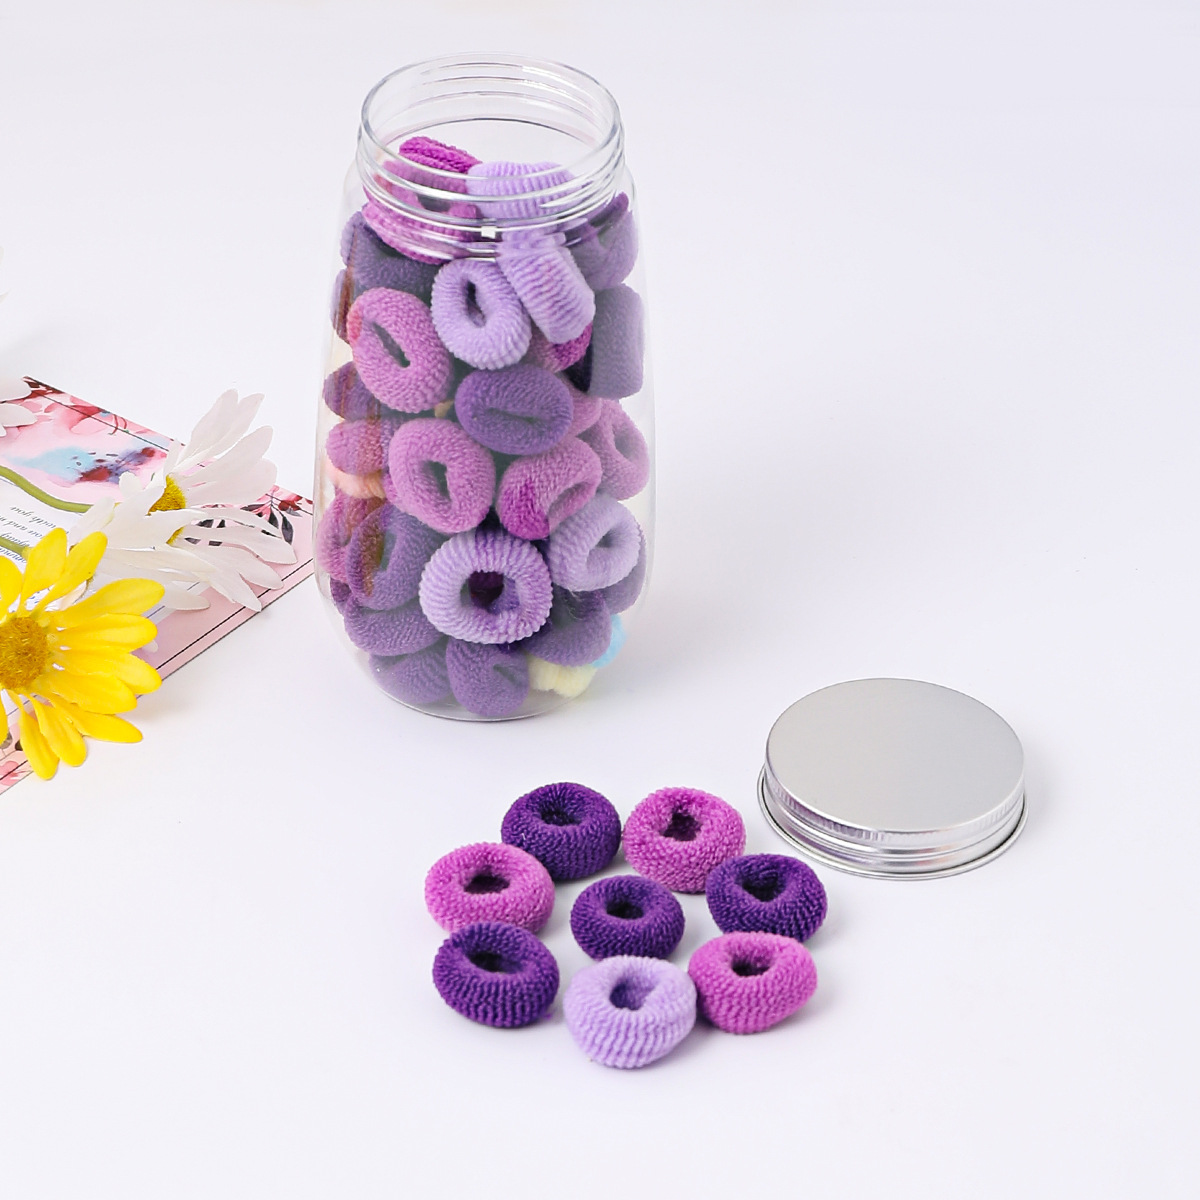 1:50 cans of purple mixed wide-brimmed towel rings